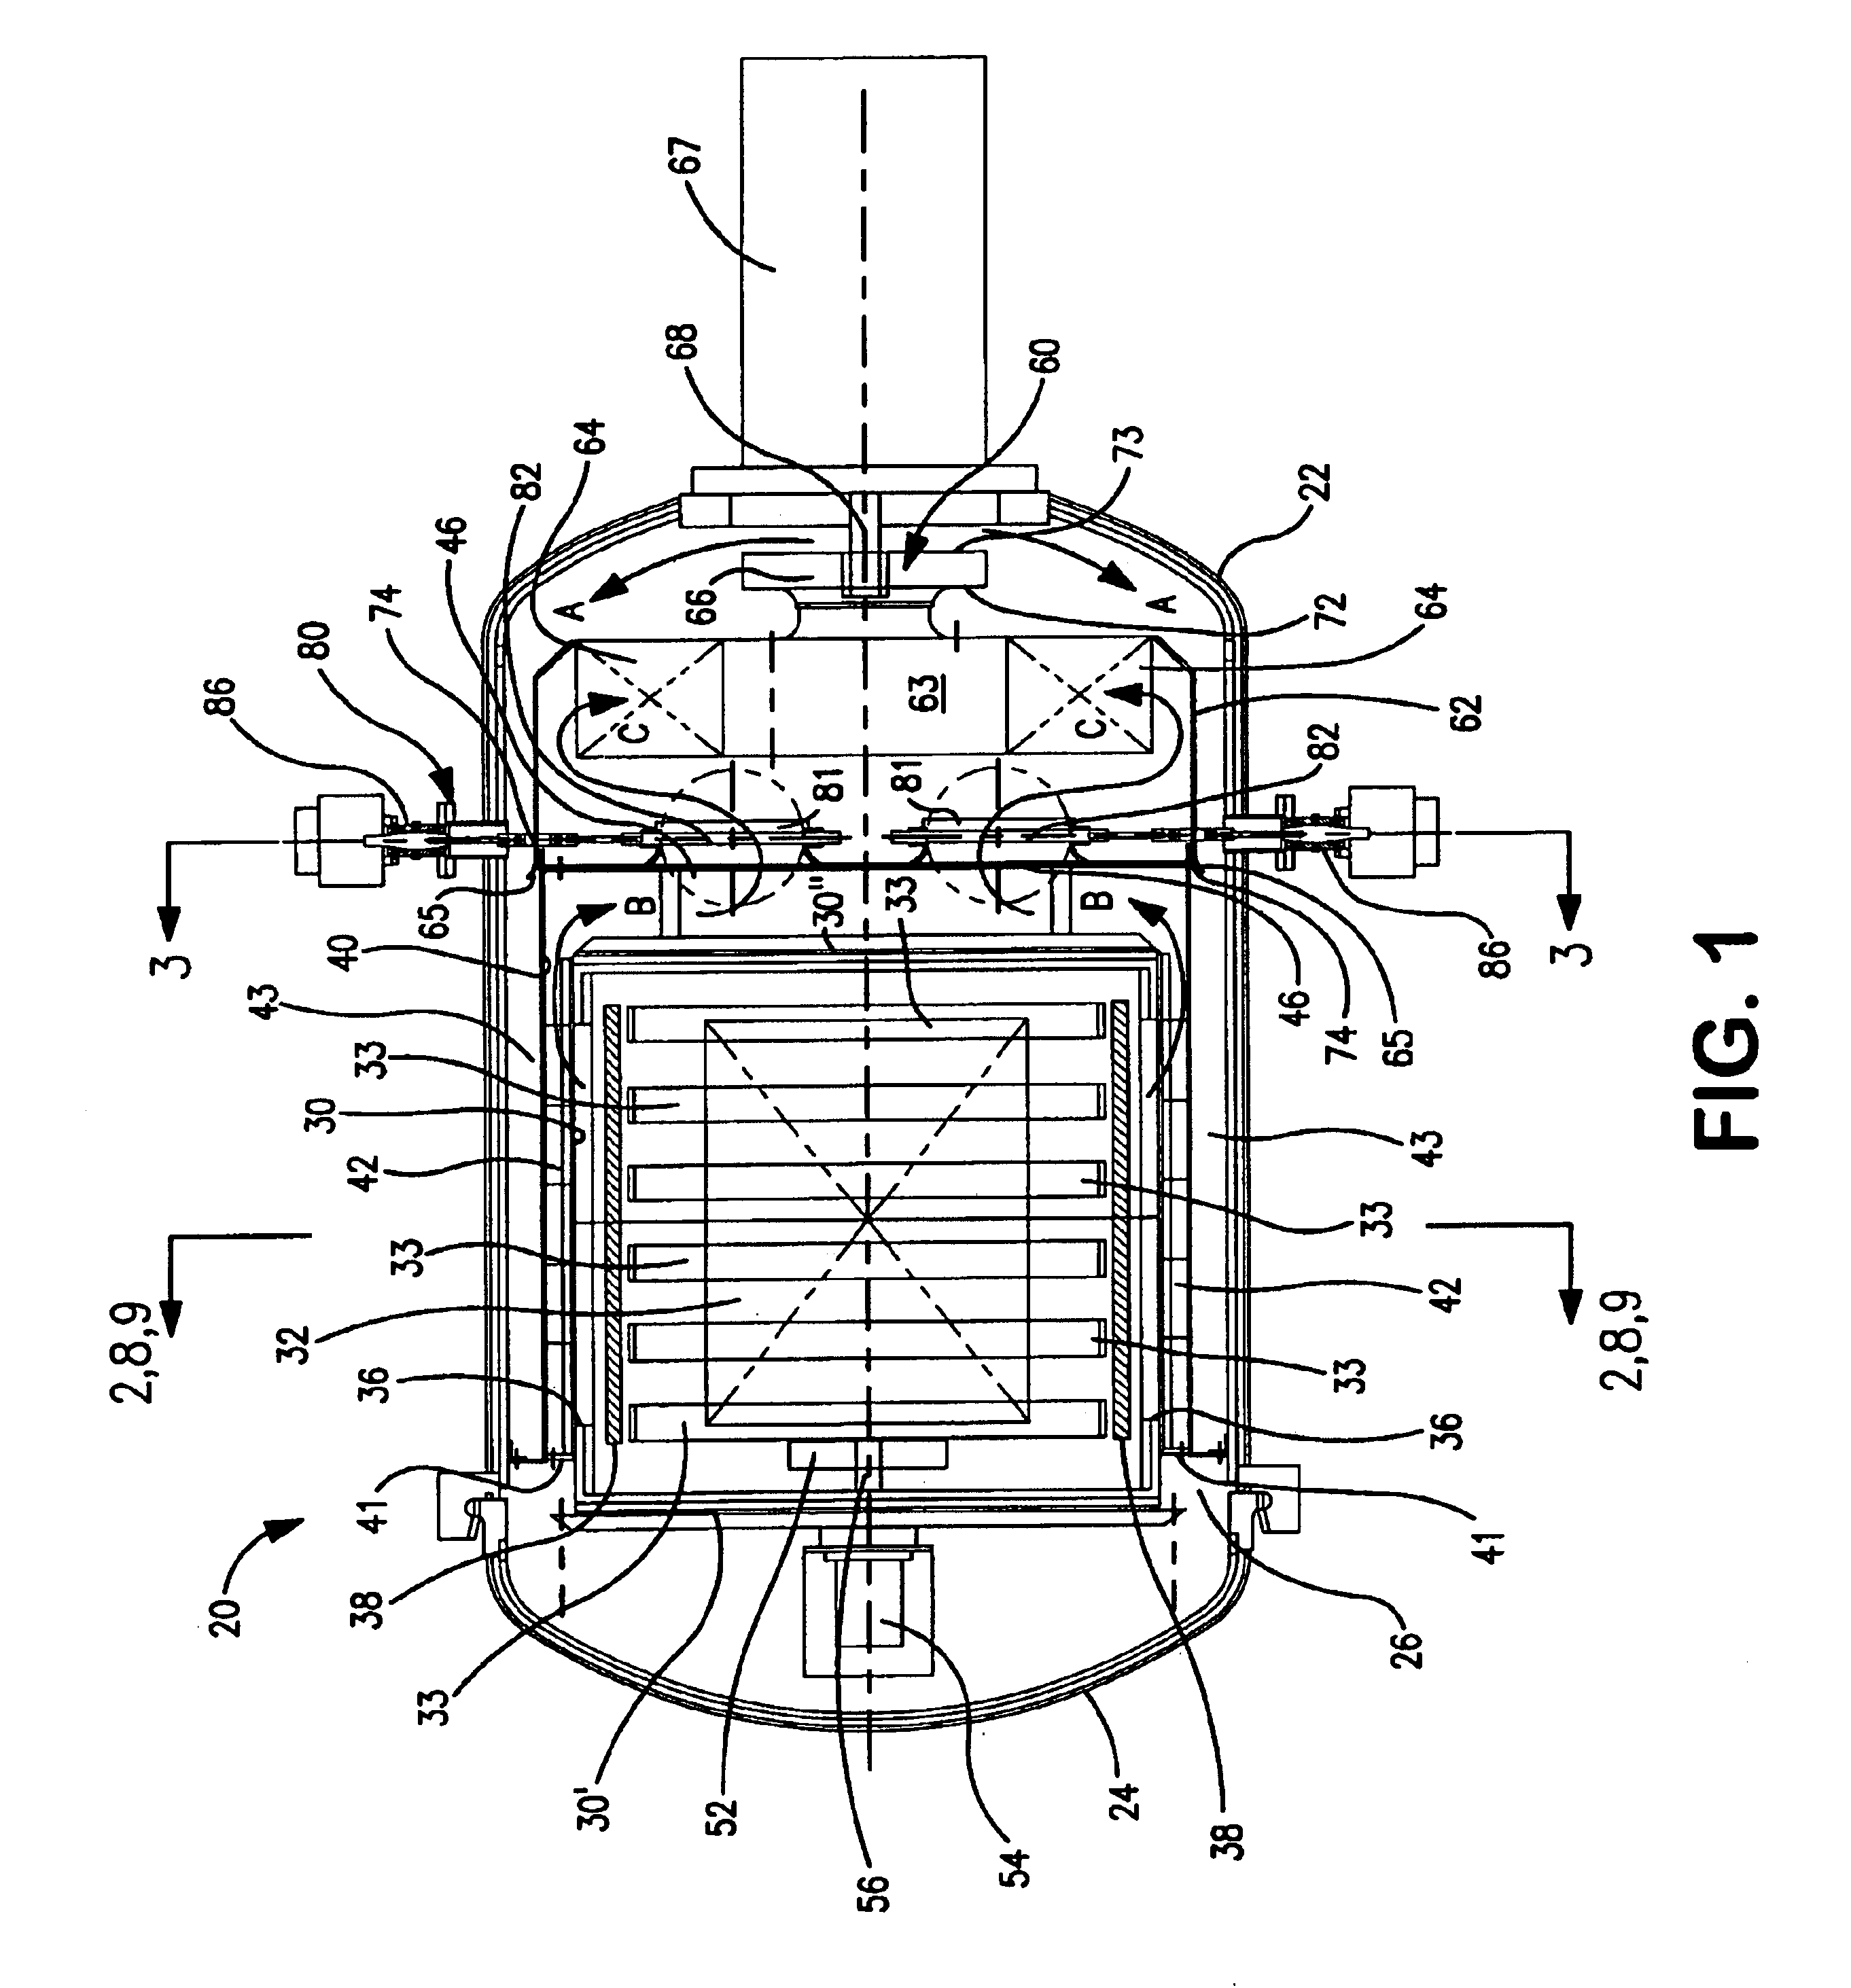 Directional cooling system for vacuum heat treating furnace